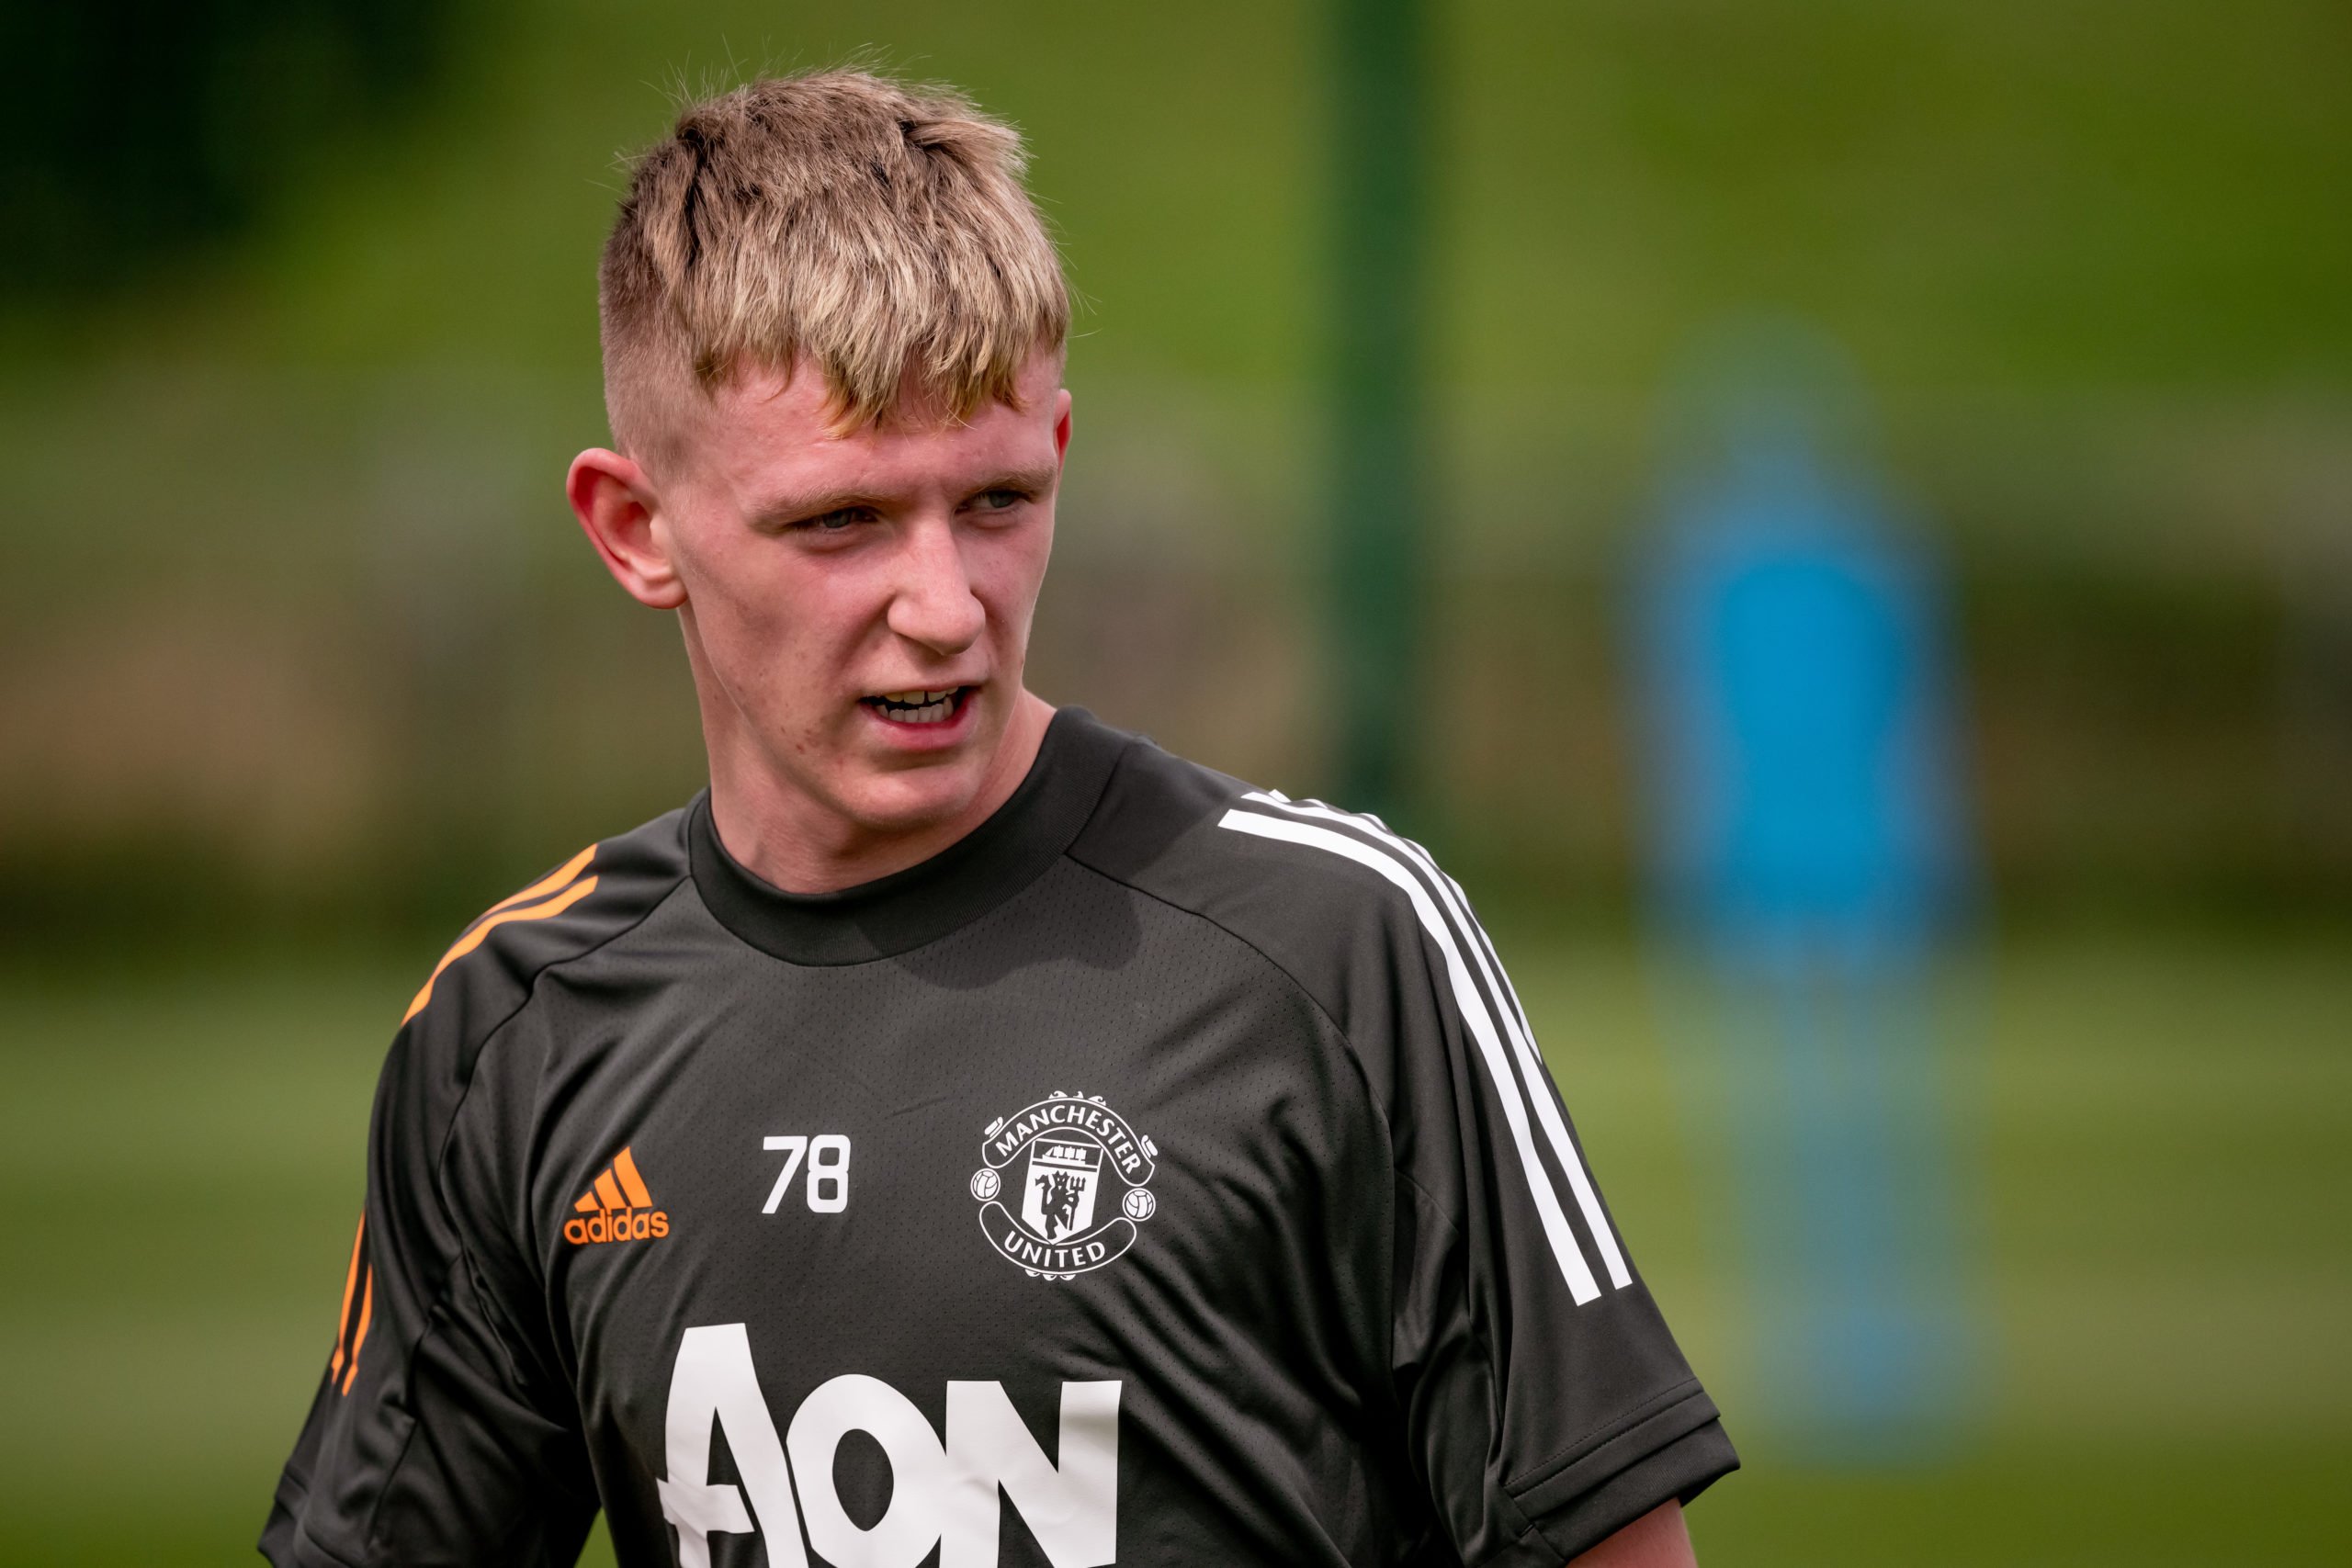 Logan Pye celebrates making return from injury in FA Youth Cup win after five months out